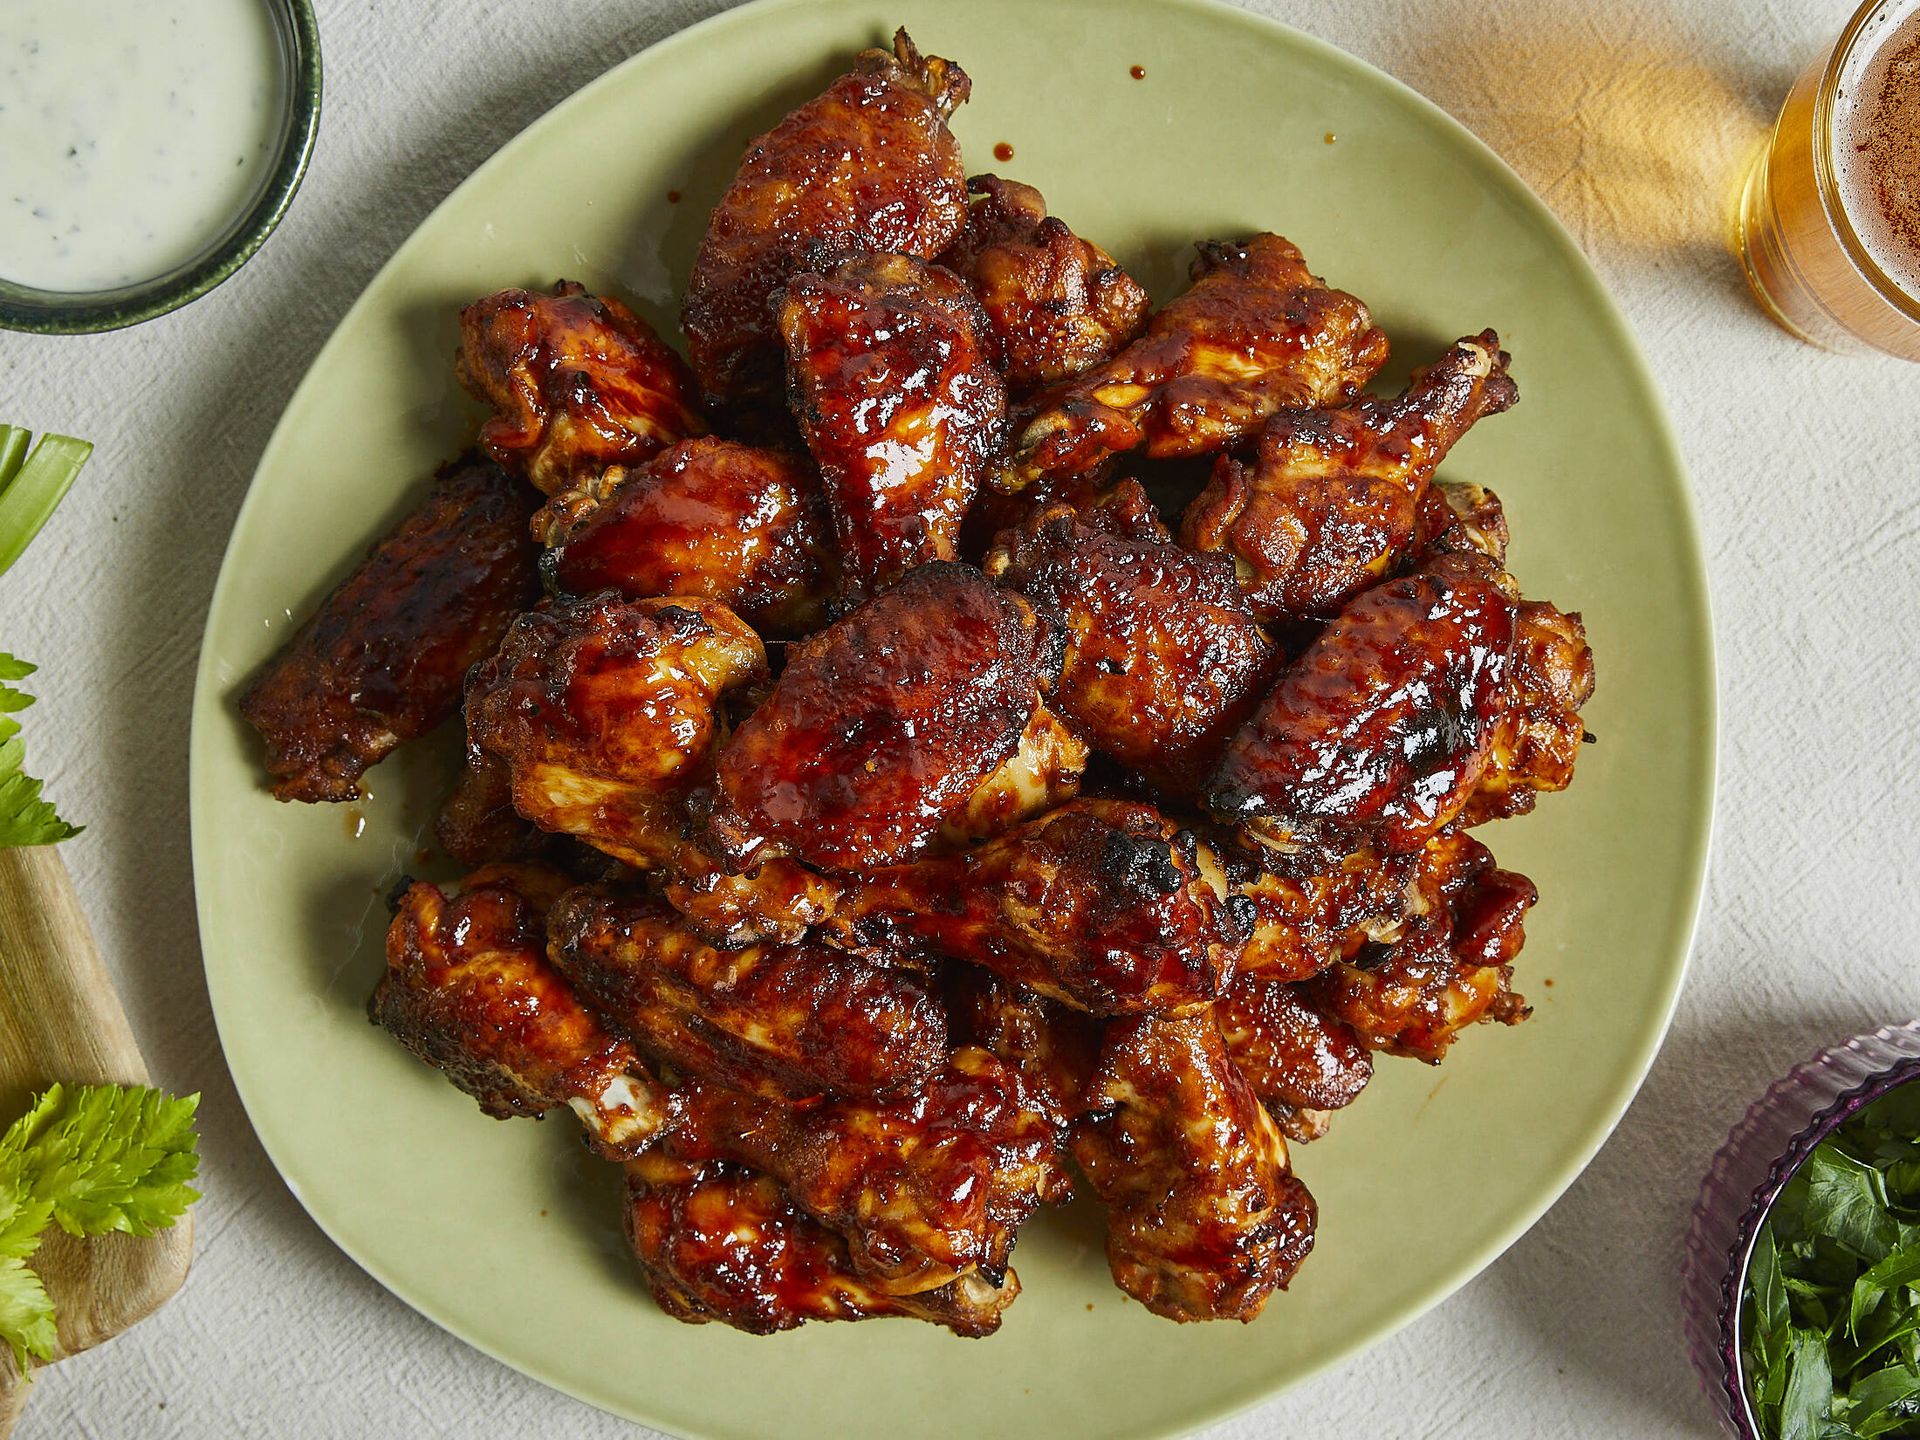 Oven baked chicken wings